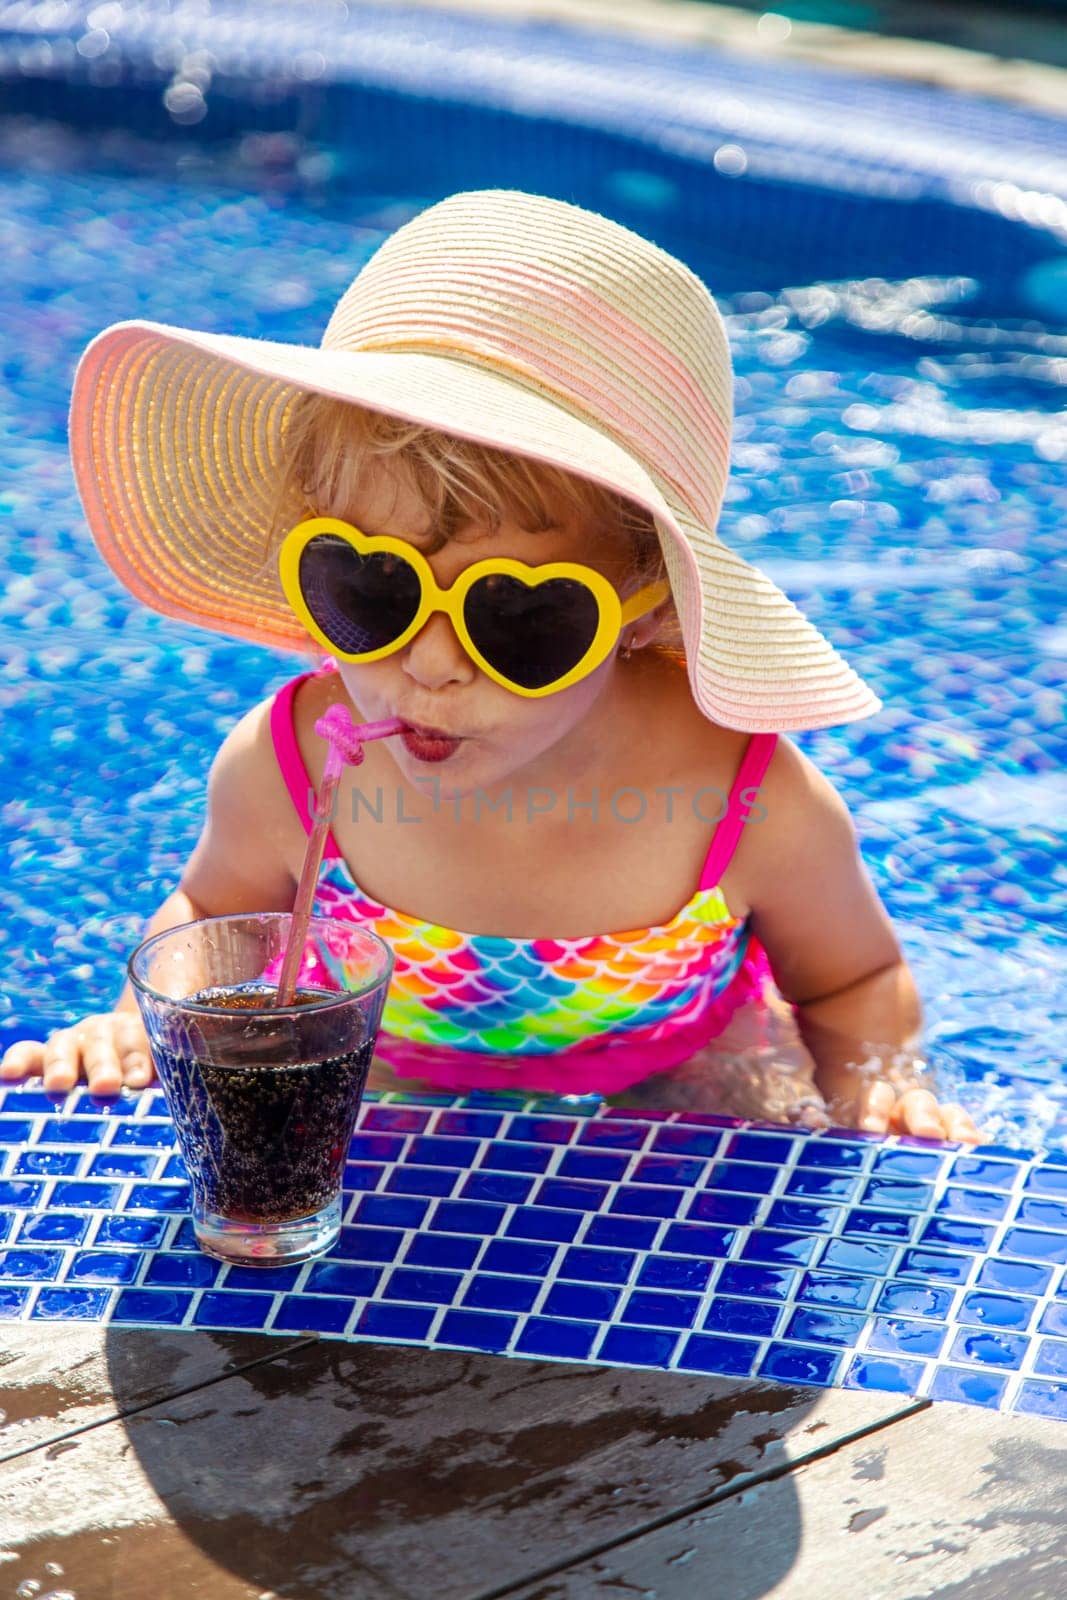 A child near the pool in sunglasses drinks a cocktail. Selective focus. Kid.